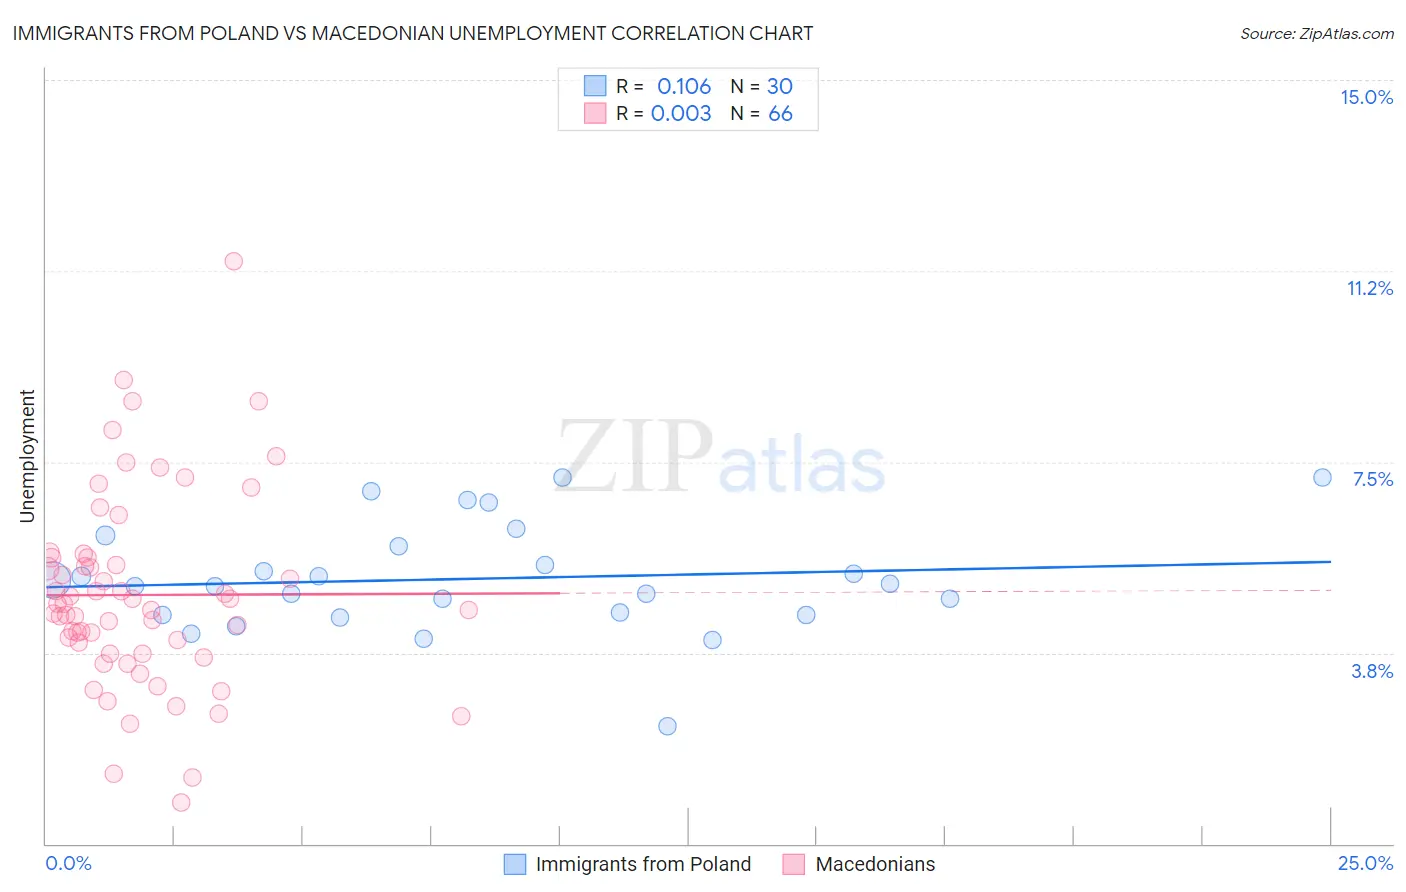 Immigrants from Poland vs Macedonian Unemployment